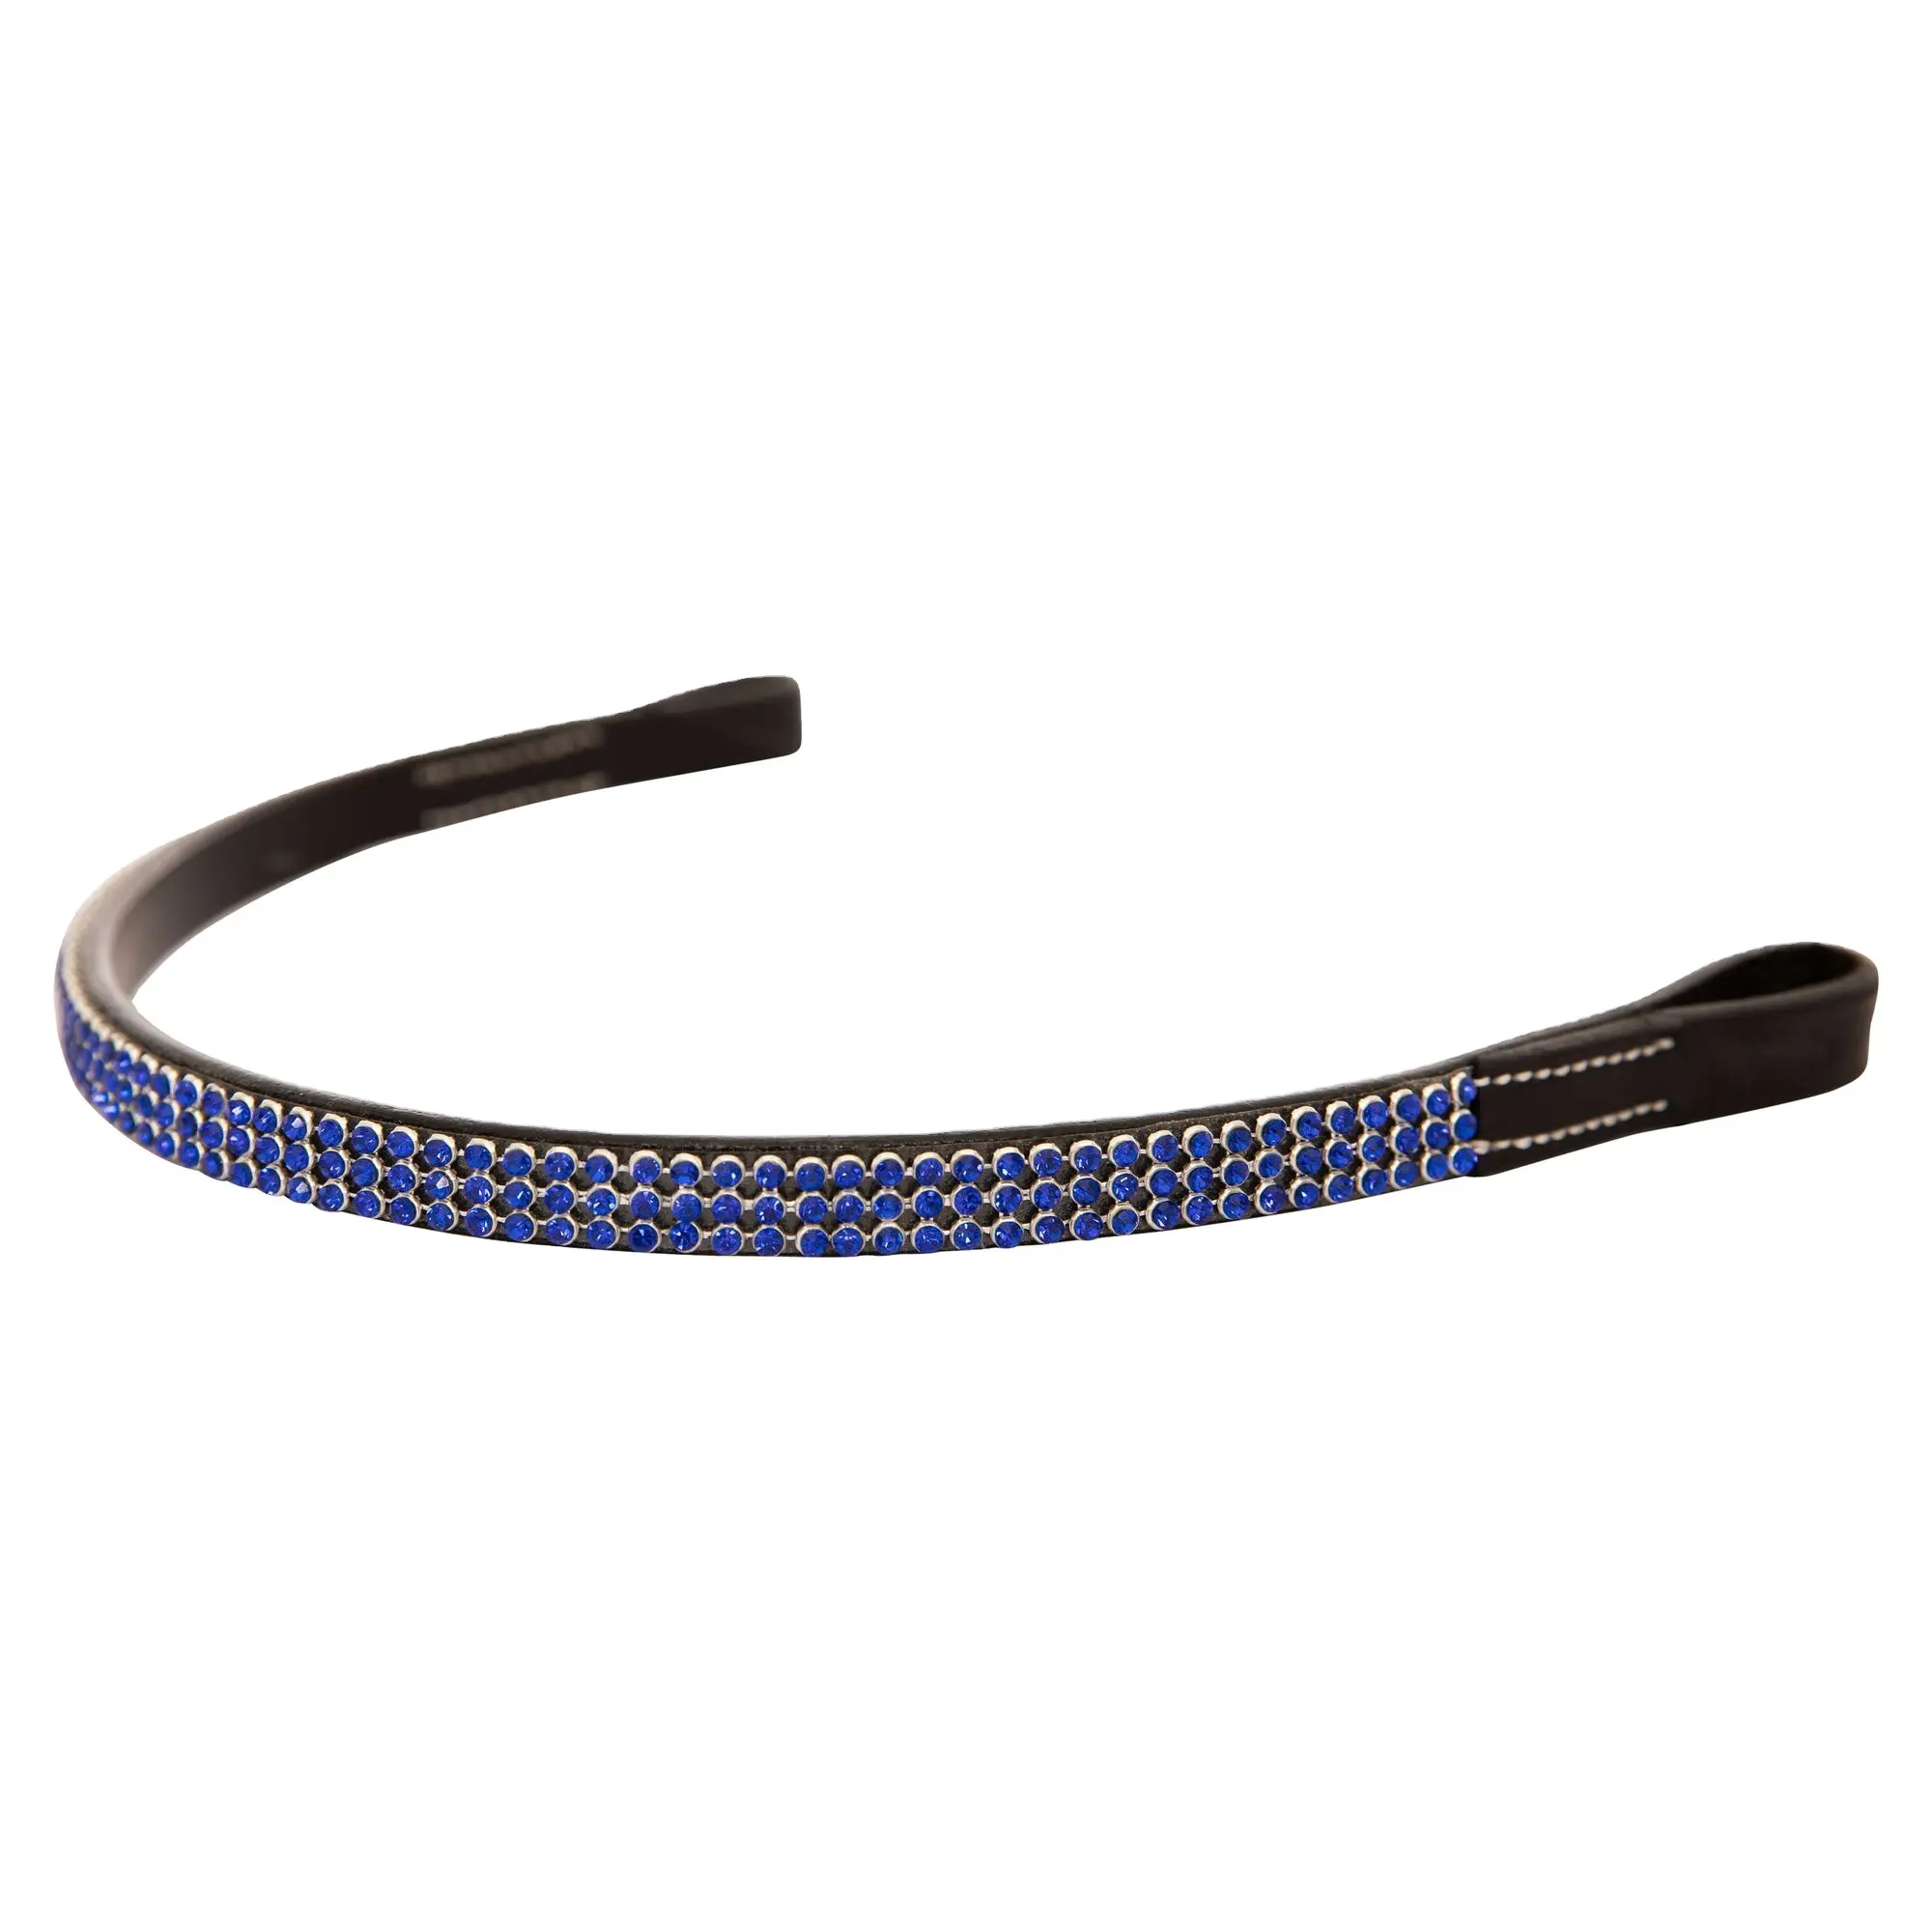 latest 2021 trendy design Italian leather fancy brow band with blue crystals for bridle Horse Riding Equestrian